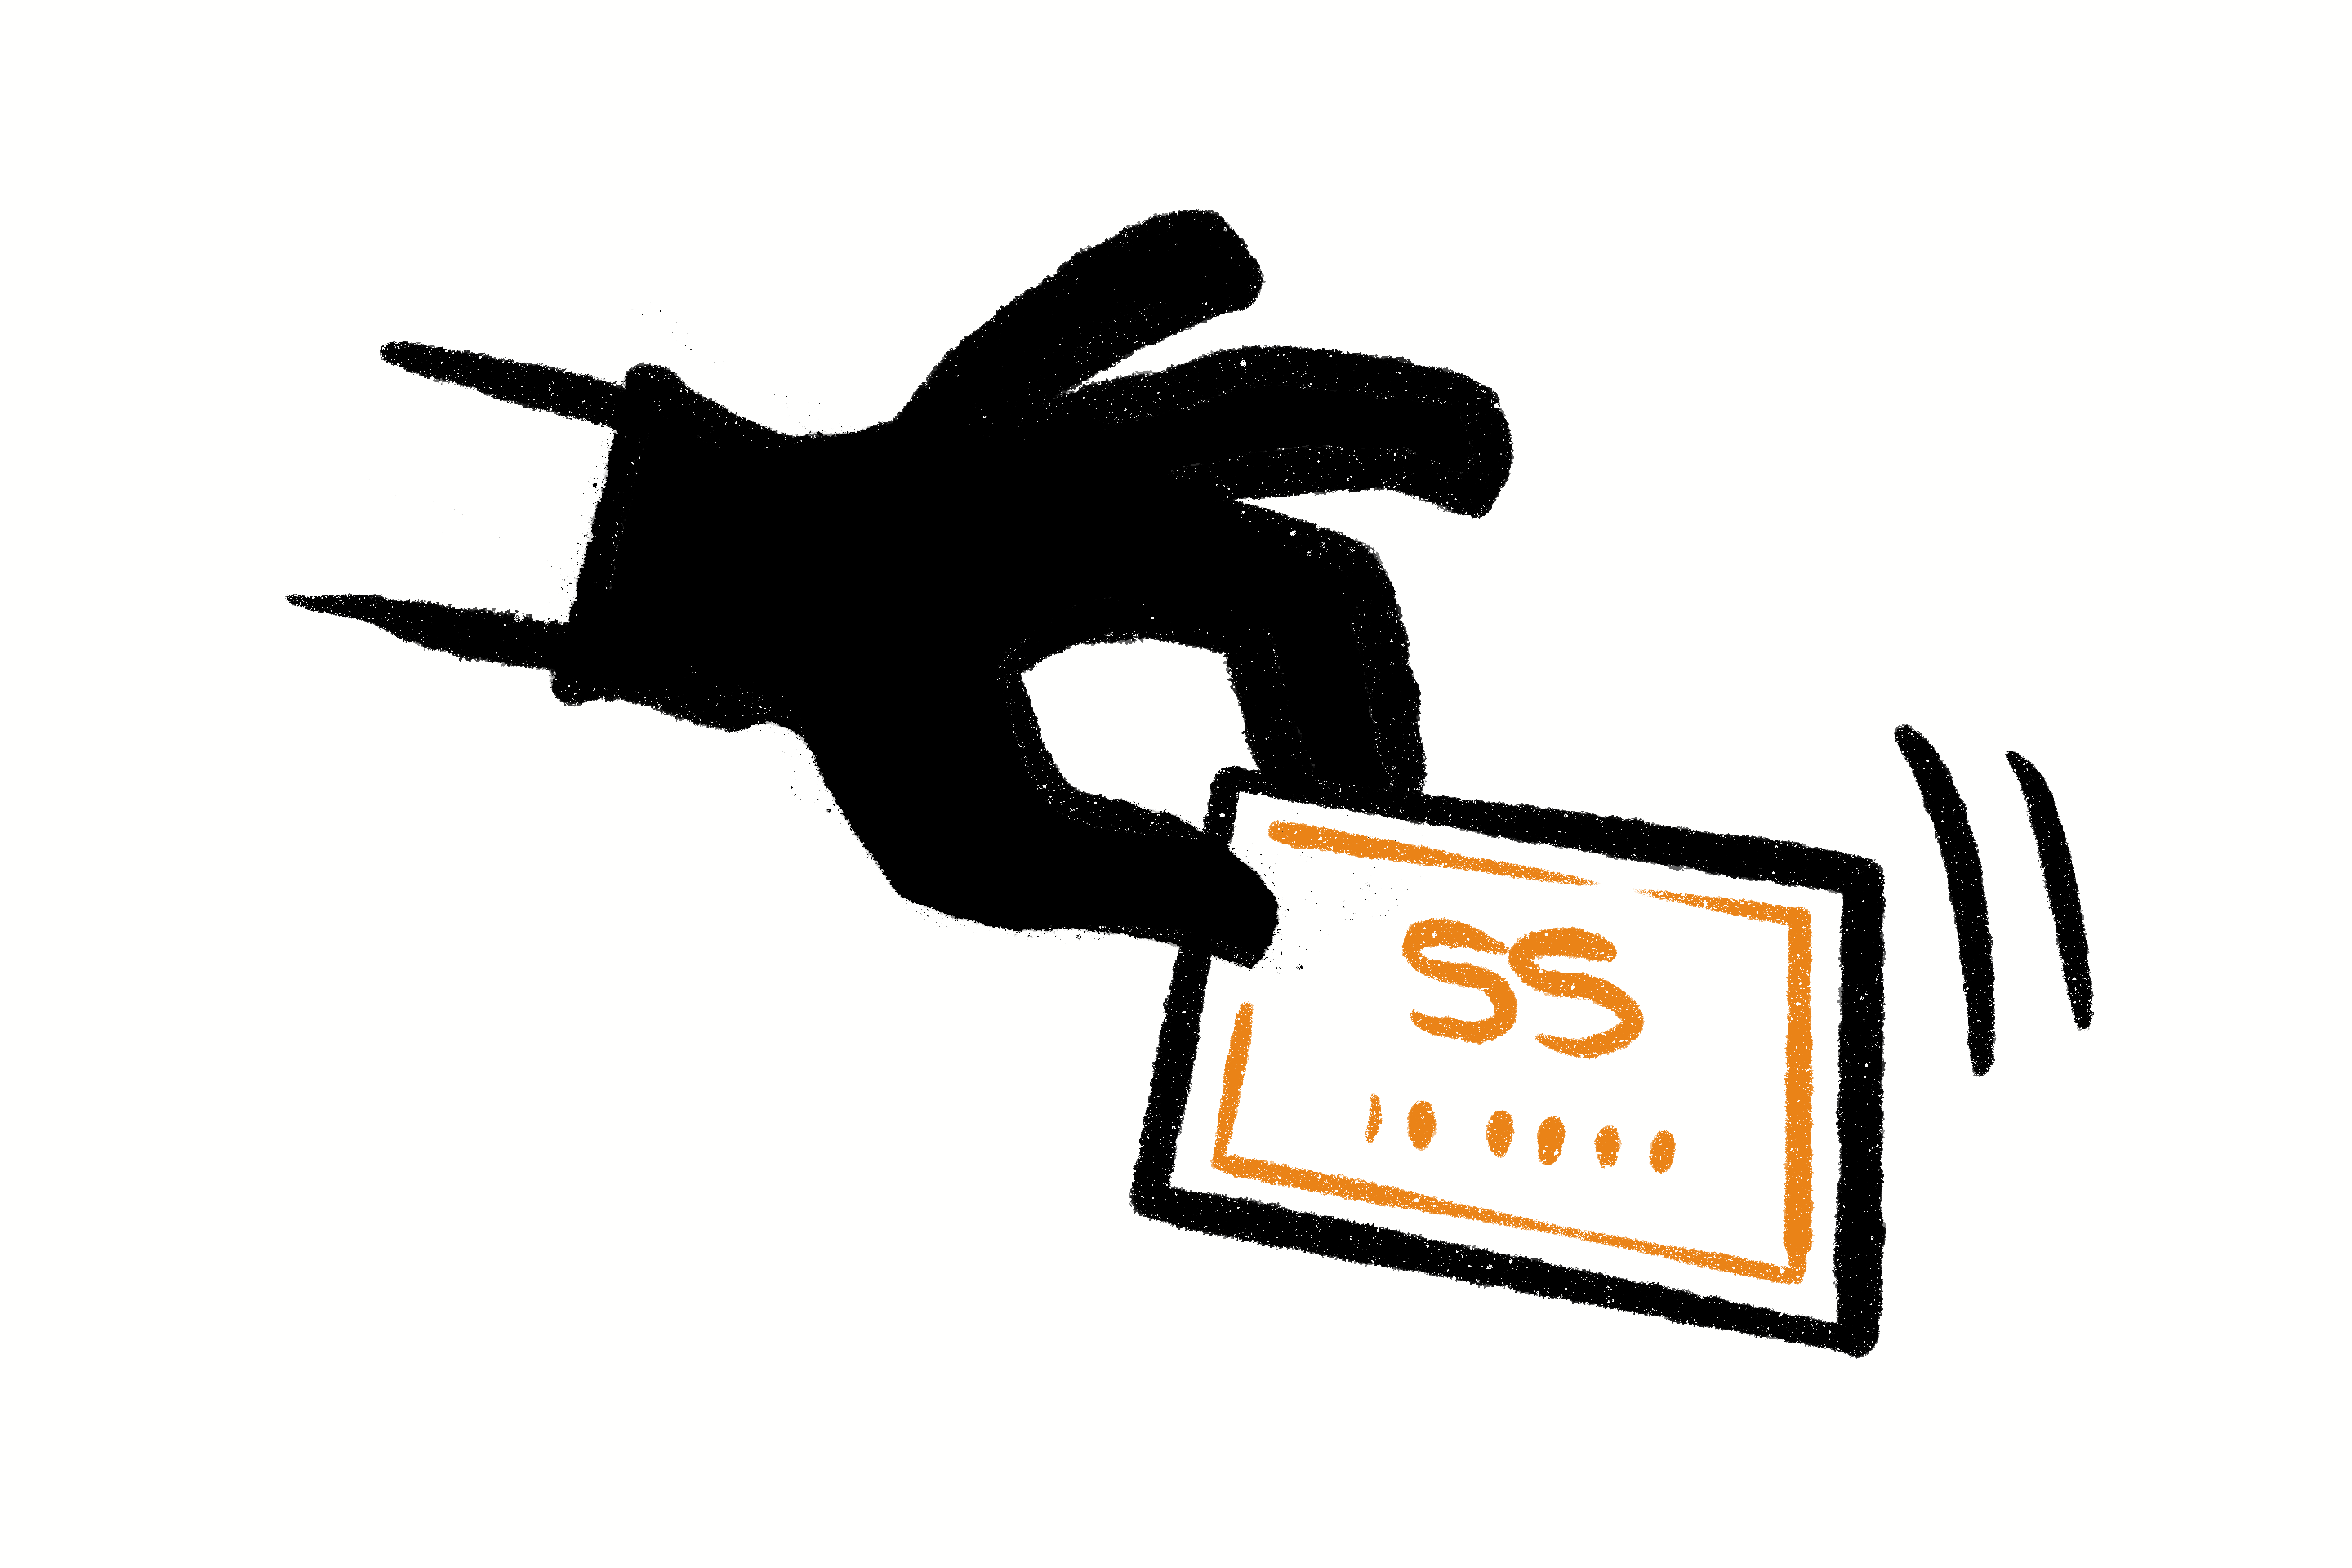 Illustration of a thieve's hand grabbing a social security card